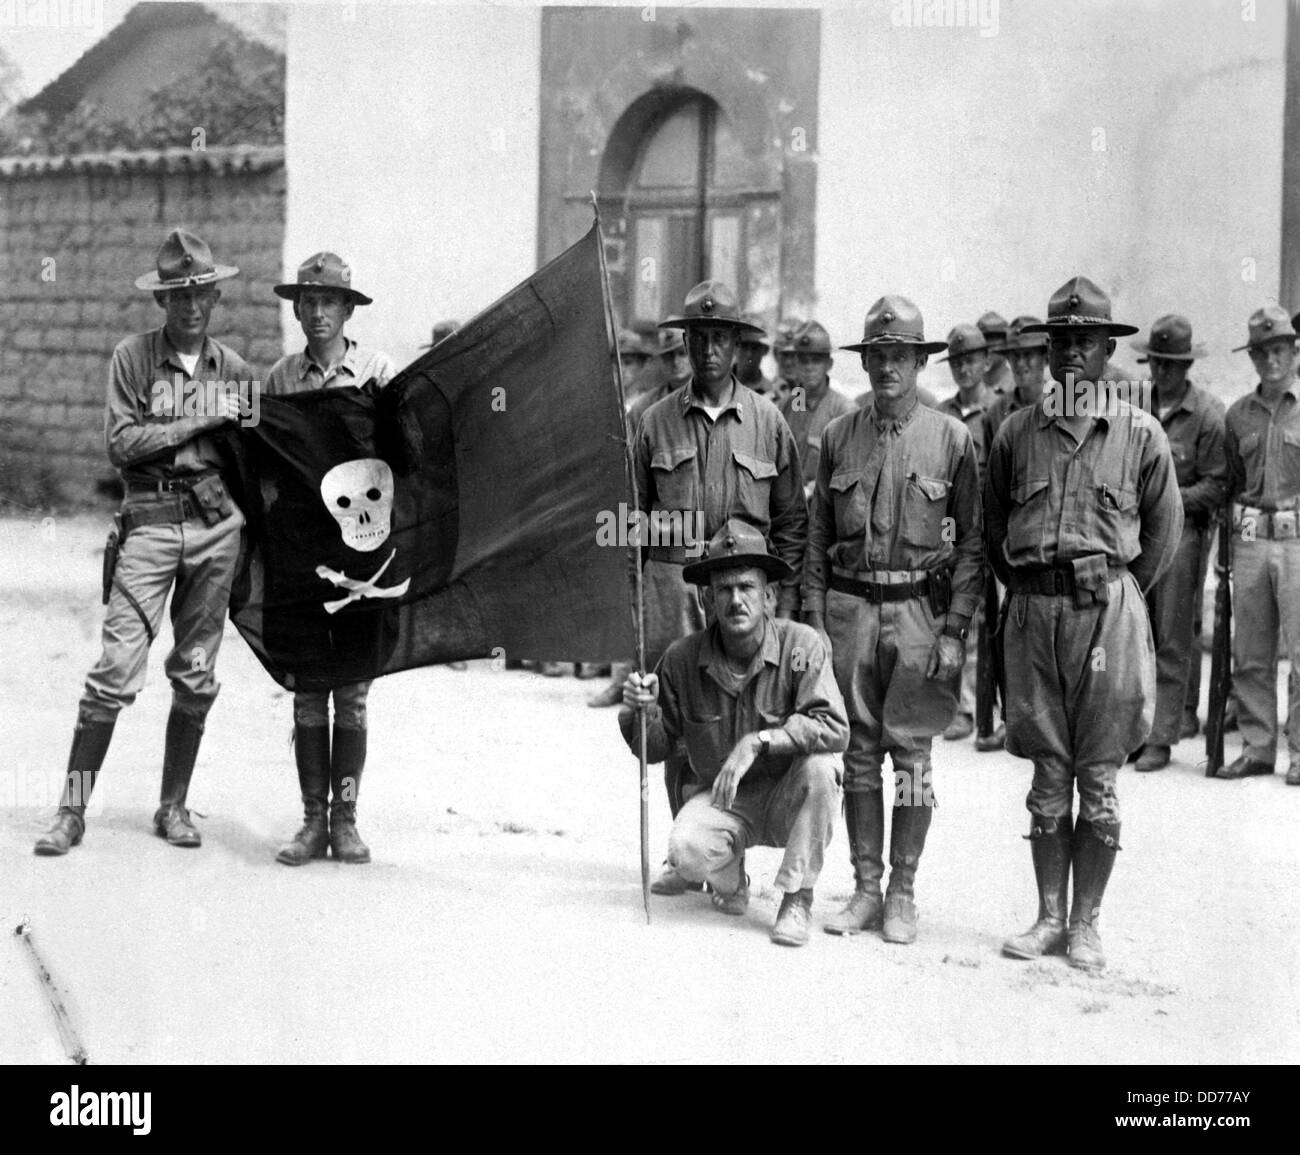 U.S. Marines captured a flag of rebel forces led by Augusto Sandino in 1932. After the Marines supervised the 1932 Presidential Stock Photo